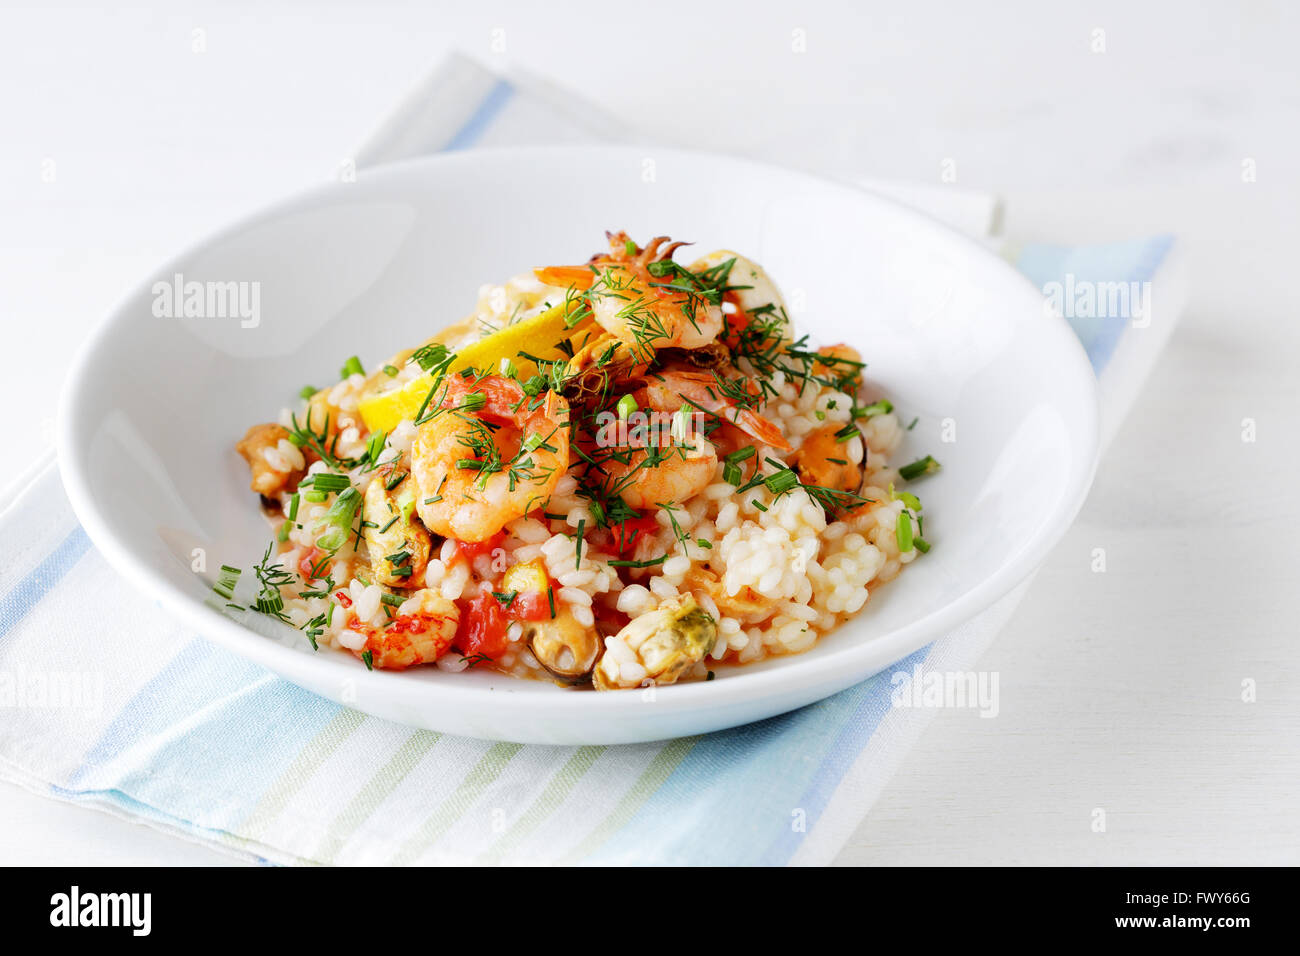 italian risotto with seafood, food close-up Stock Photo